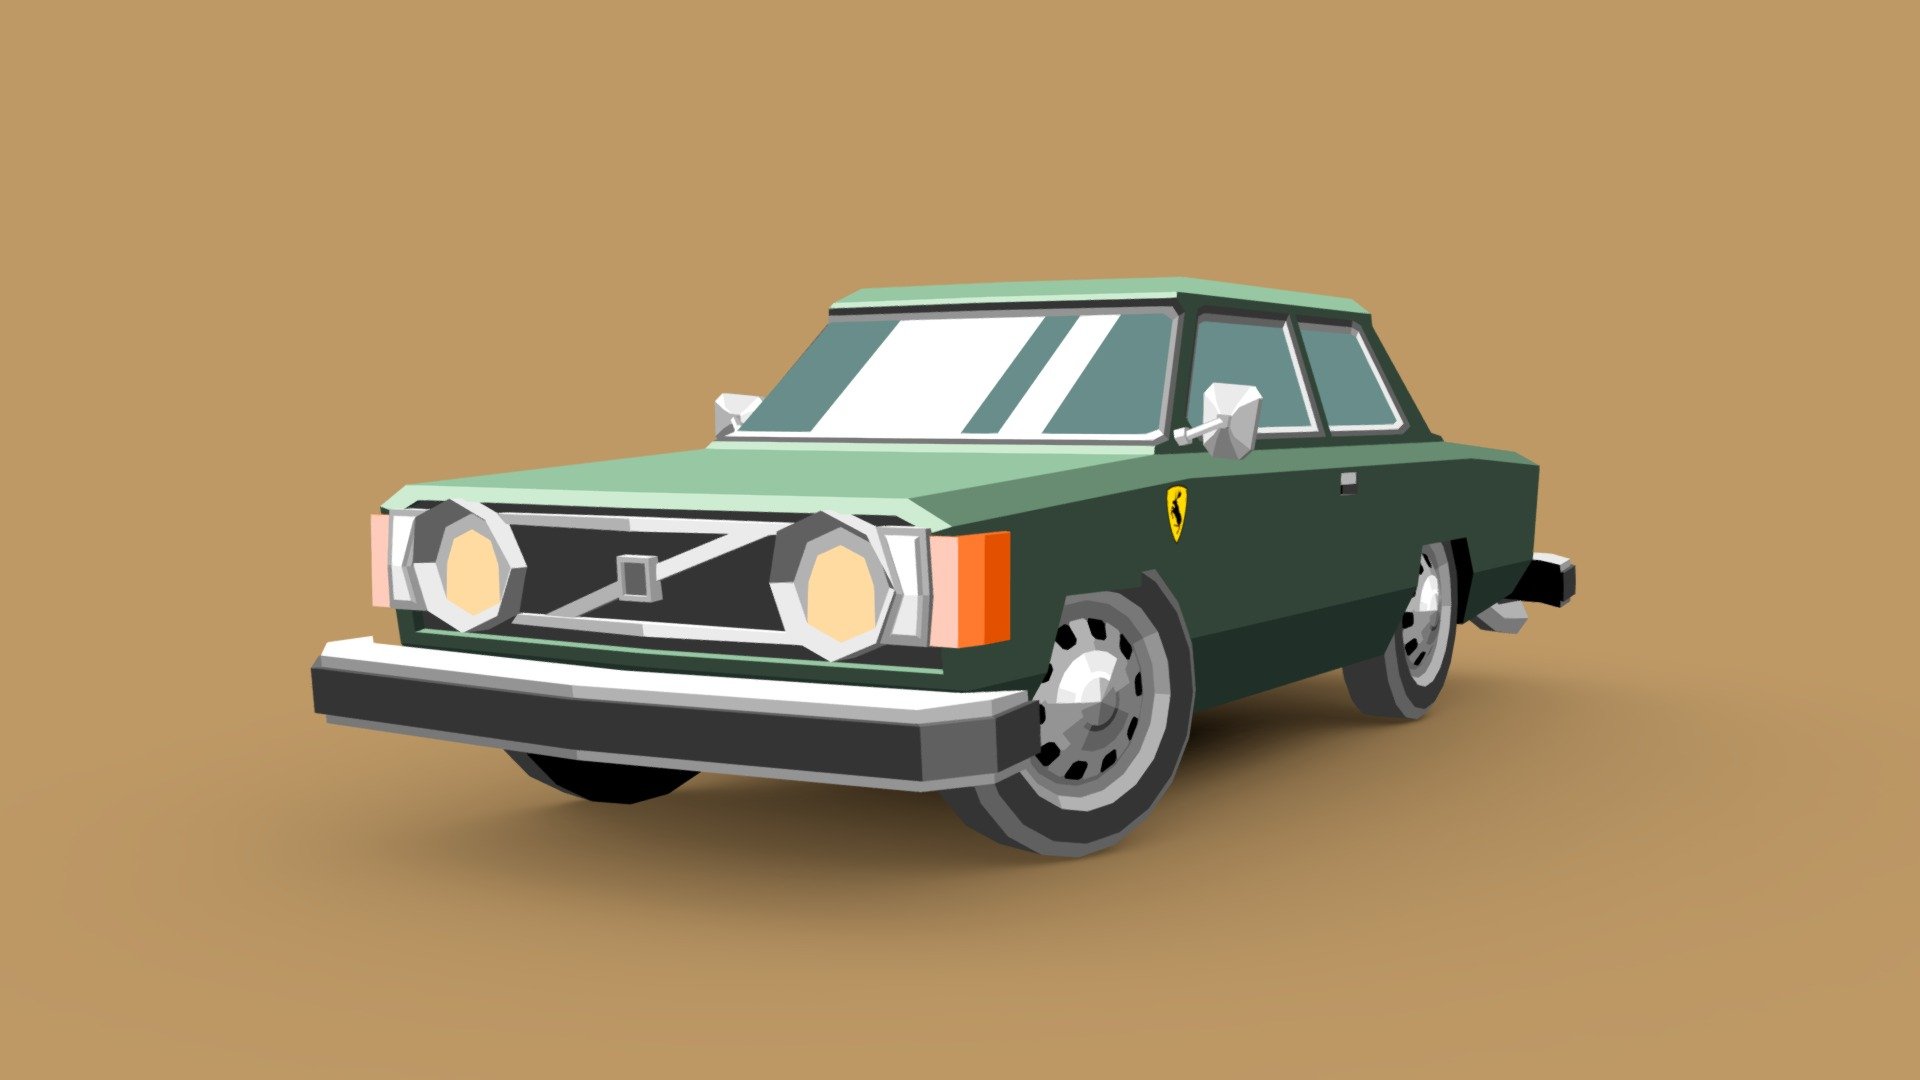 Low poly cartoon style model of the Volvo 142.

The Volvo 140 Series is a line of mid-size cars manufactured and marketed by Volvo from 1966 to 1974 in two- and four-door sedan (models 142 and 144 respectively) as well as five door station wagon (model 145) body styles—with numerous intermediate facelifts. More than a million Volvo 140s were built.

The 144 series, which followed the Volvo Amazon (replacing it in its fourth model year), was the first Volvo to use a tri-digit nomenclature, indicating series, number of cylinders and number of doors. Thus, a &ldquo;142